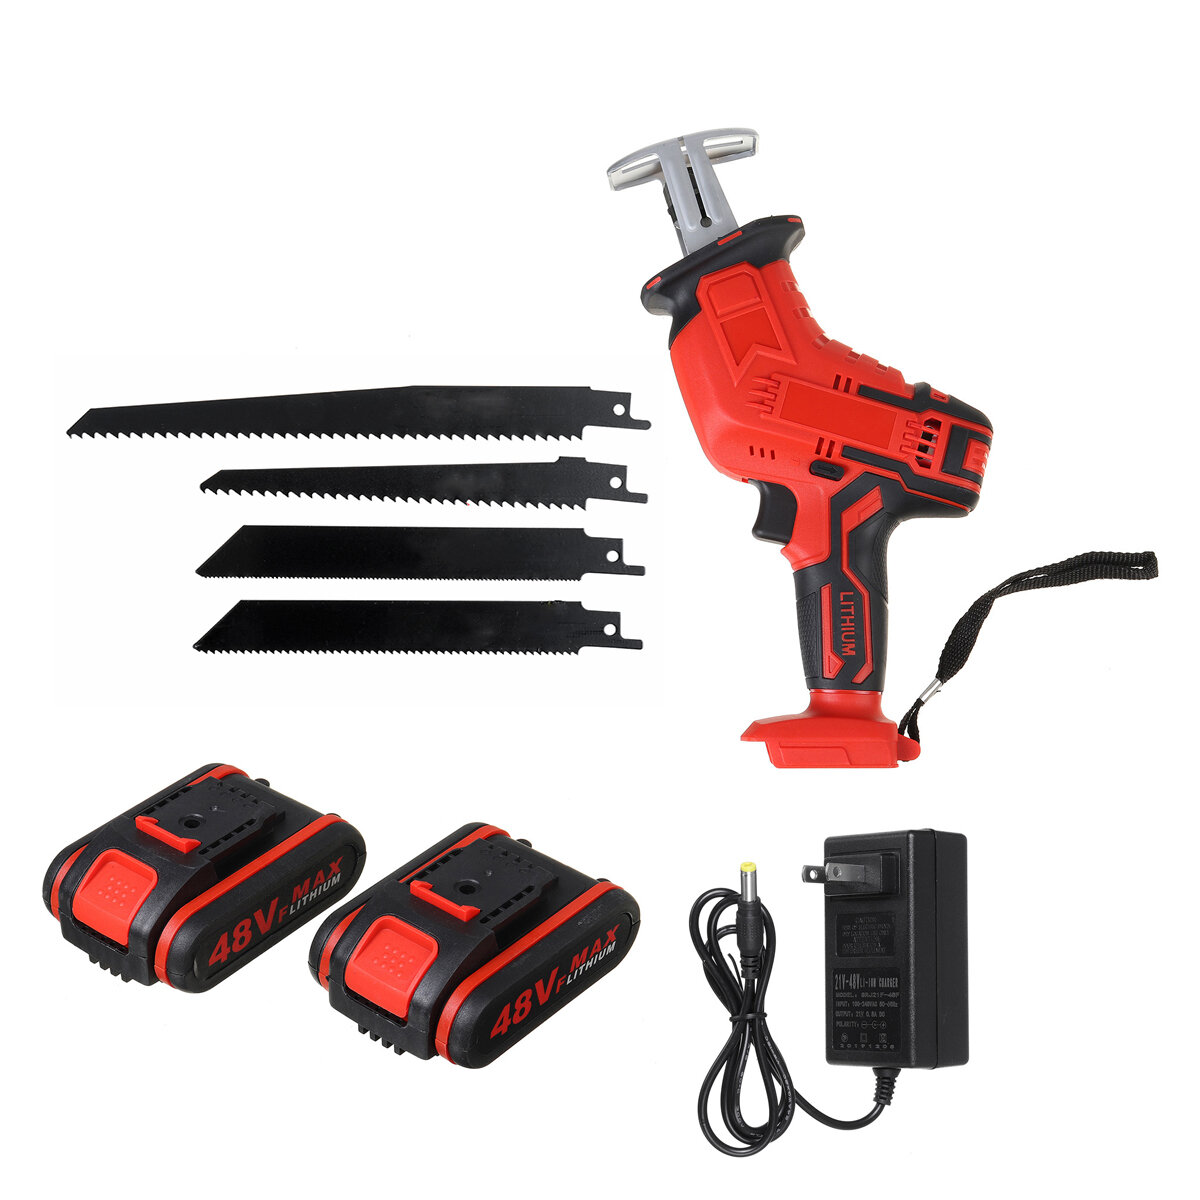 Image of 21V Cordless Reciprocating Saw Electric Saw W/ 4 Saw Blades Metal Cutting Woodworking W/ 1/2 Lithium Battery